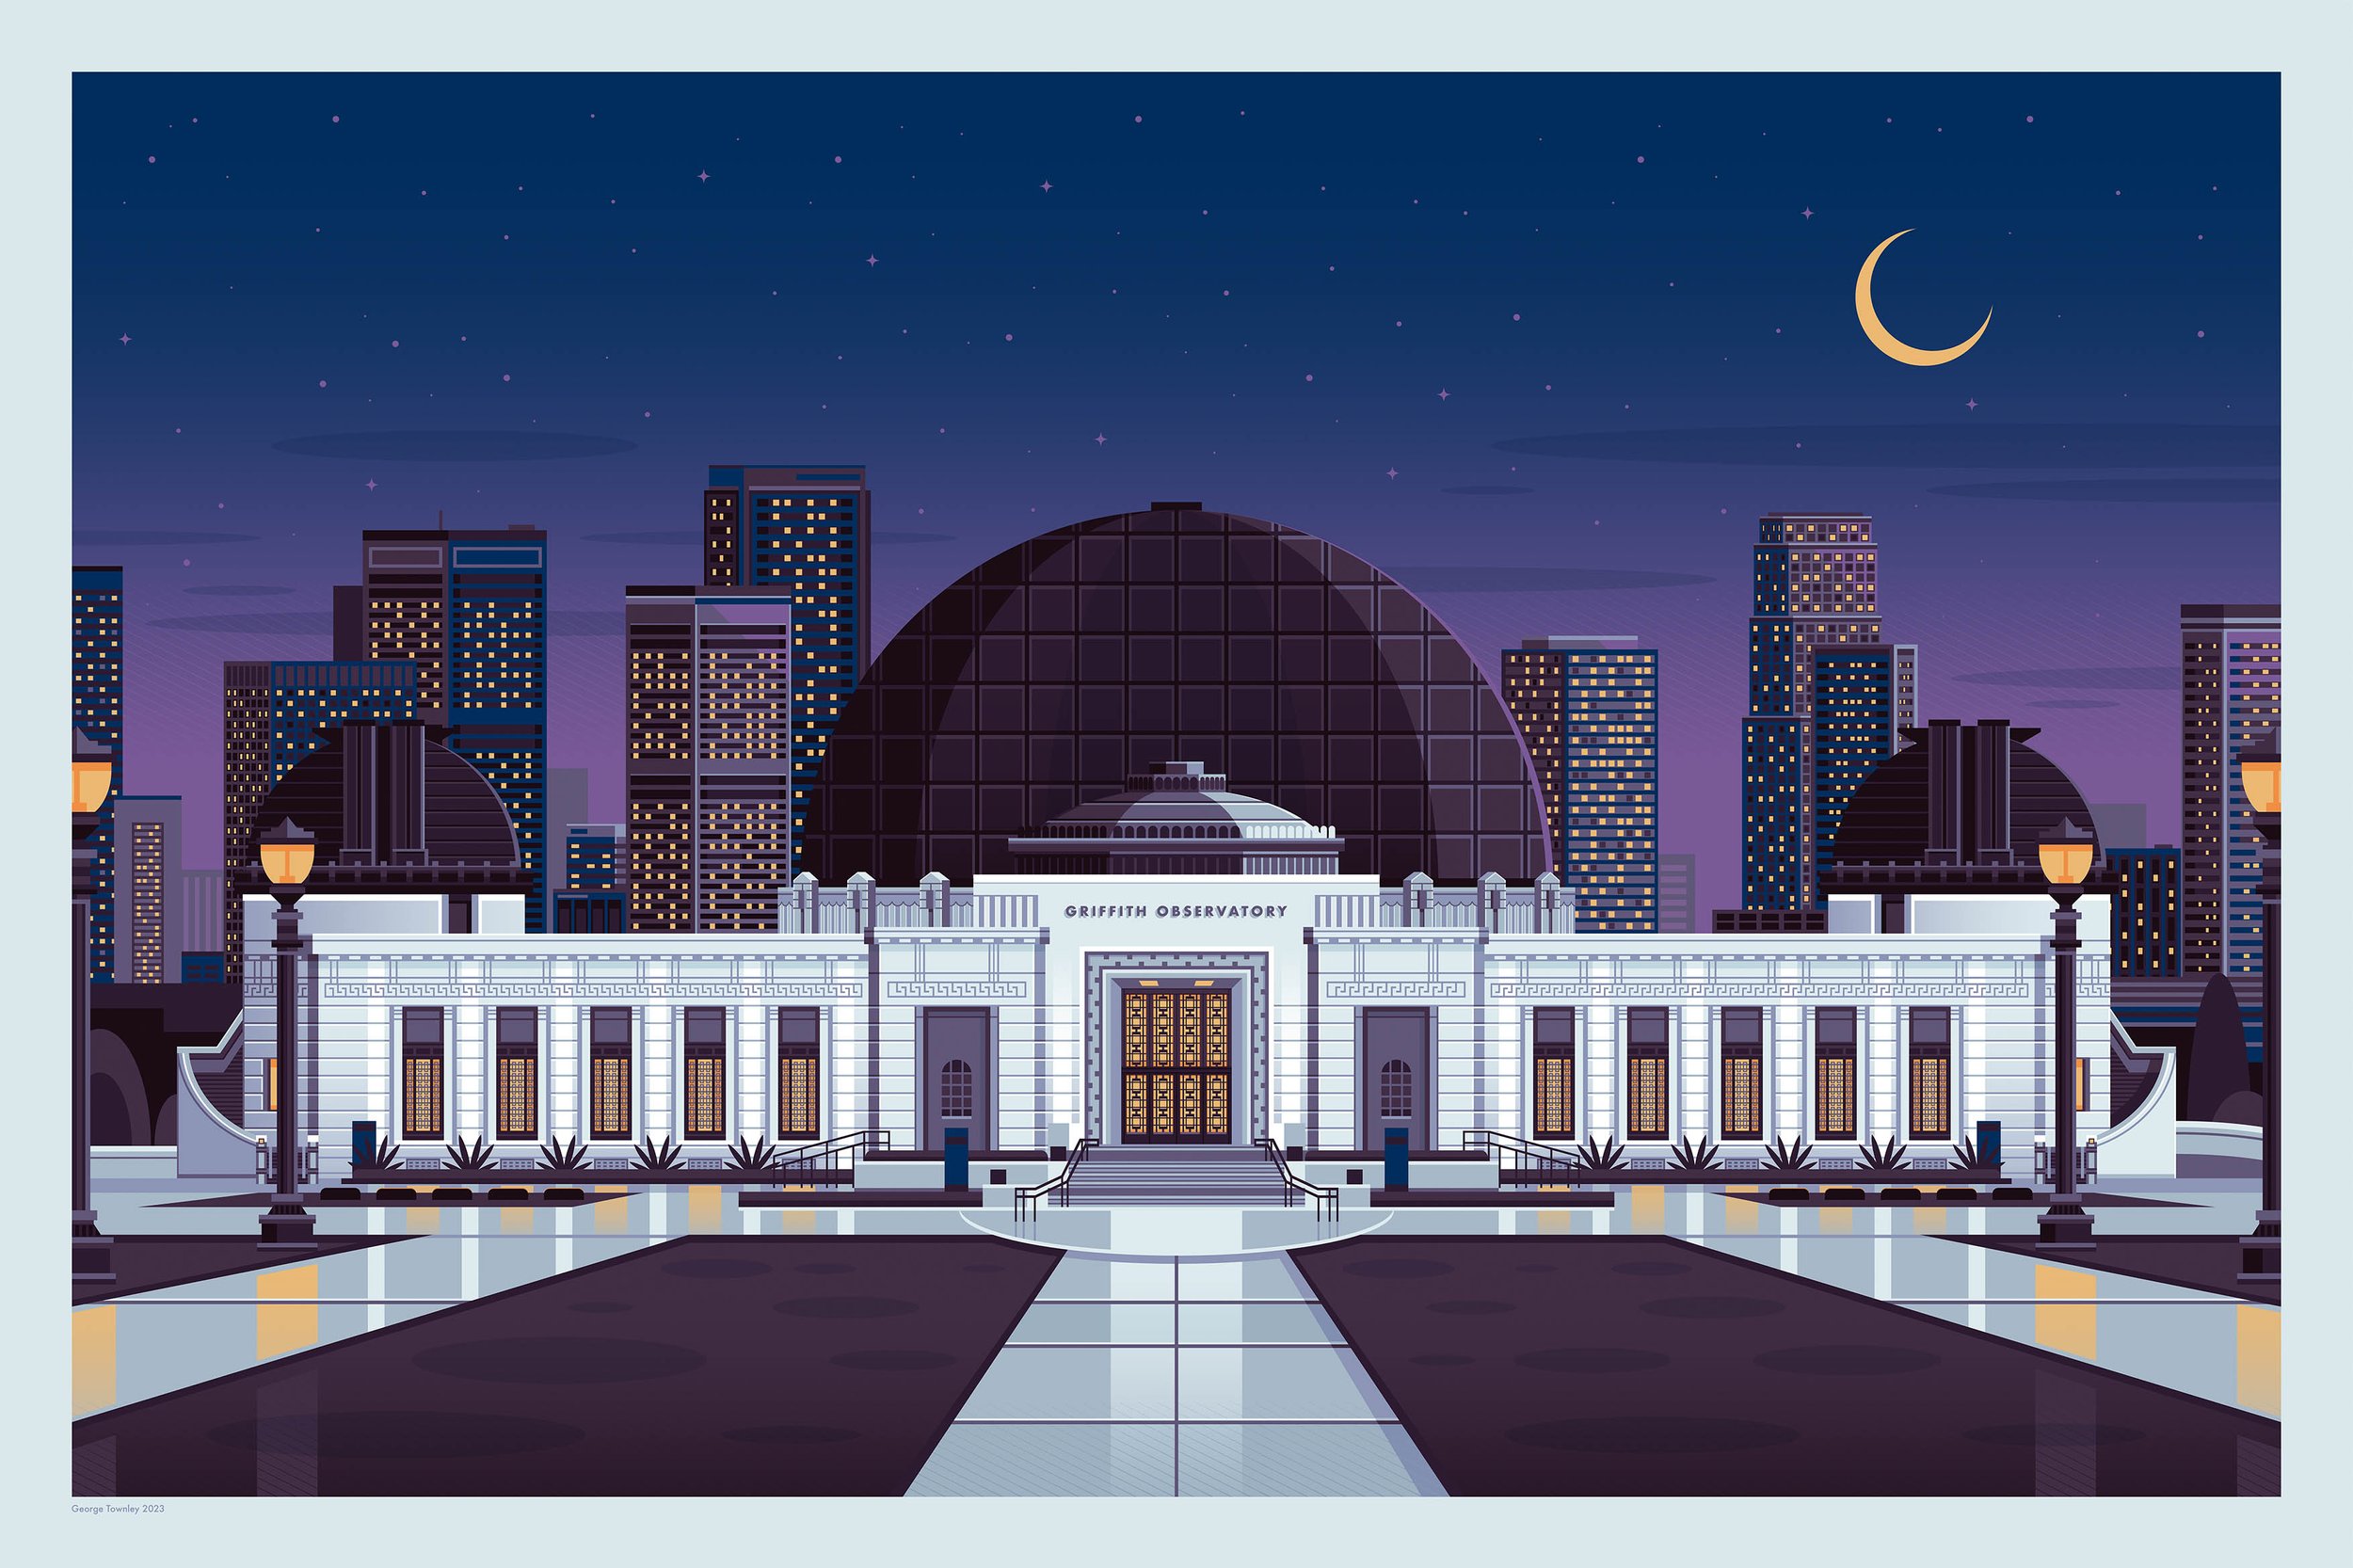 Griffith-Observatory-Night-George-Towwnley.jpg